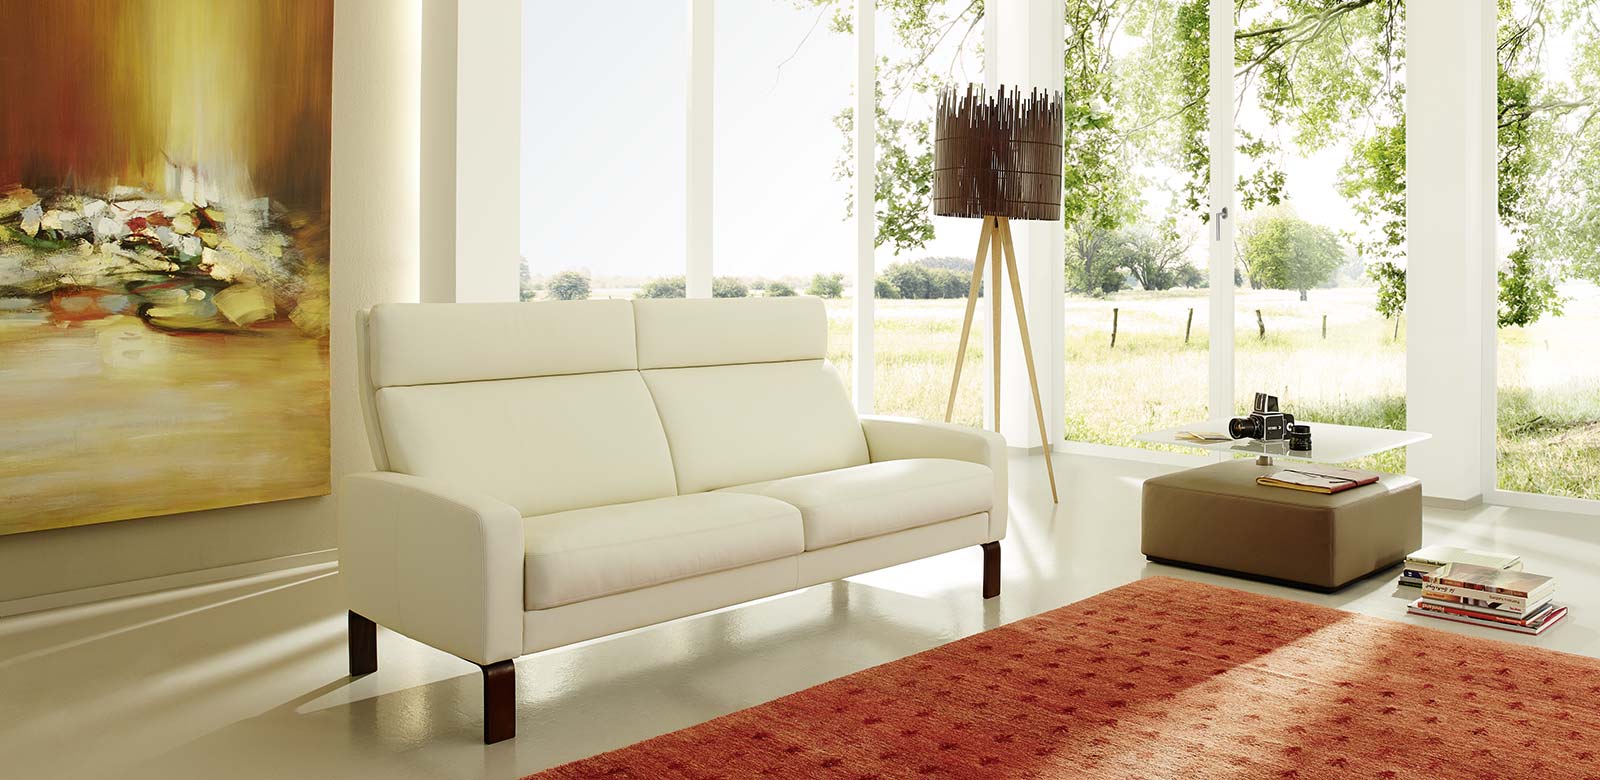 Scandinavian chic with the typical leather sofa features such as reduced lines and natural materials. The leather cover material together with the wooden feet and the clear design result in an unmistakable style.